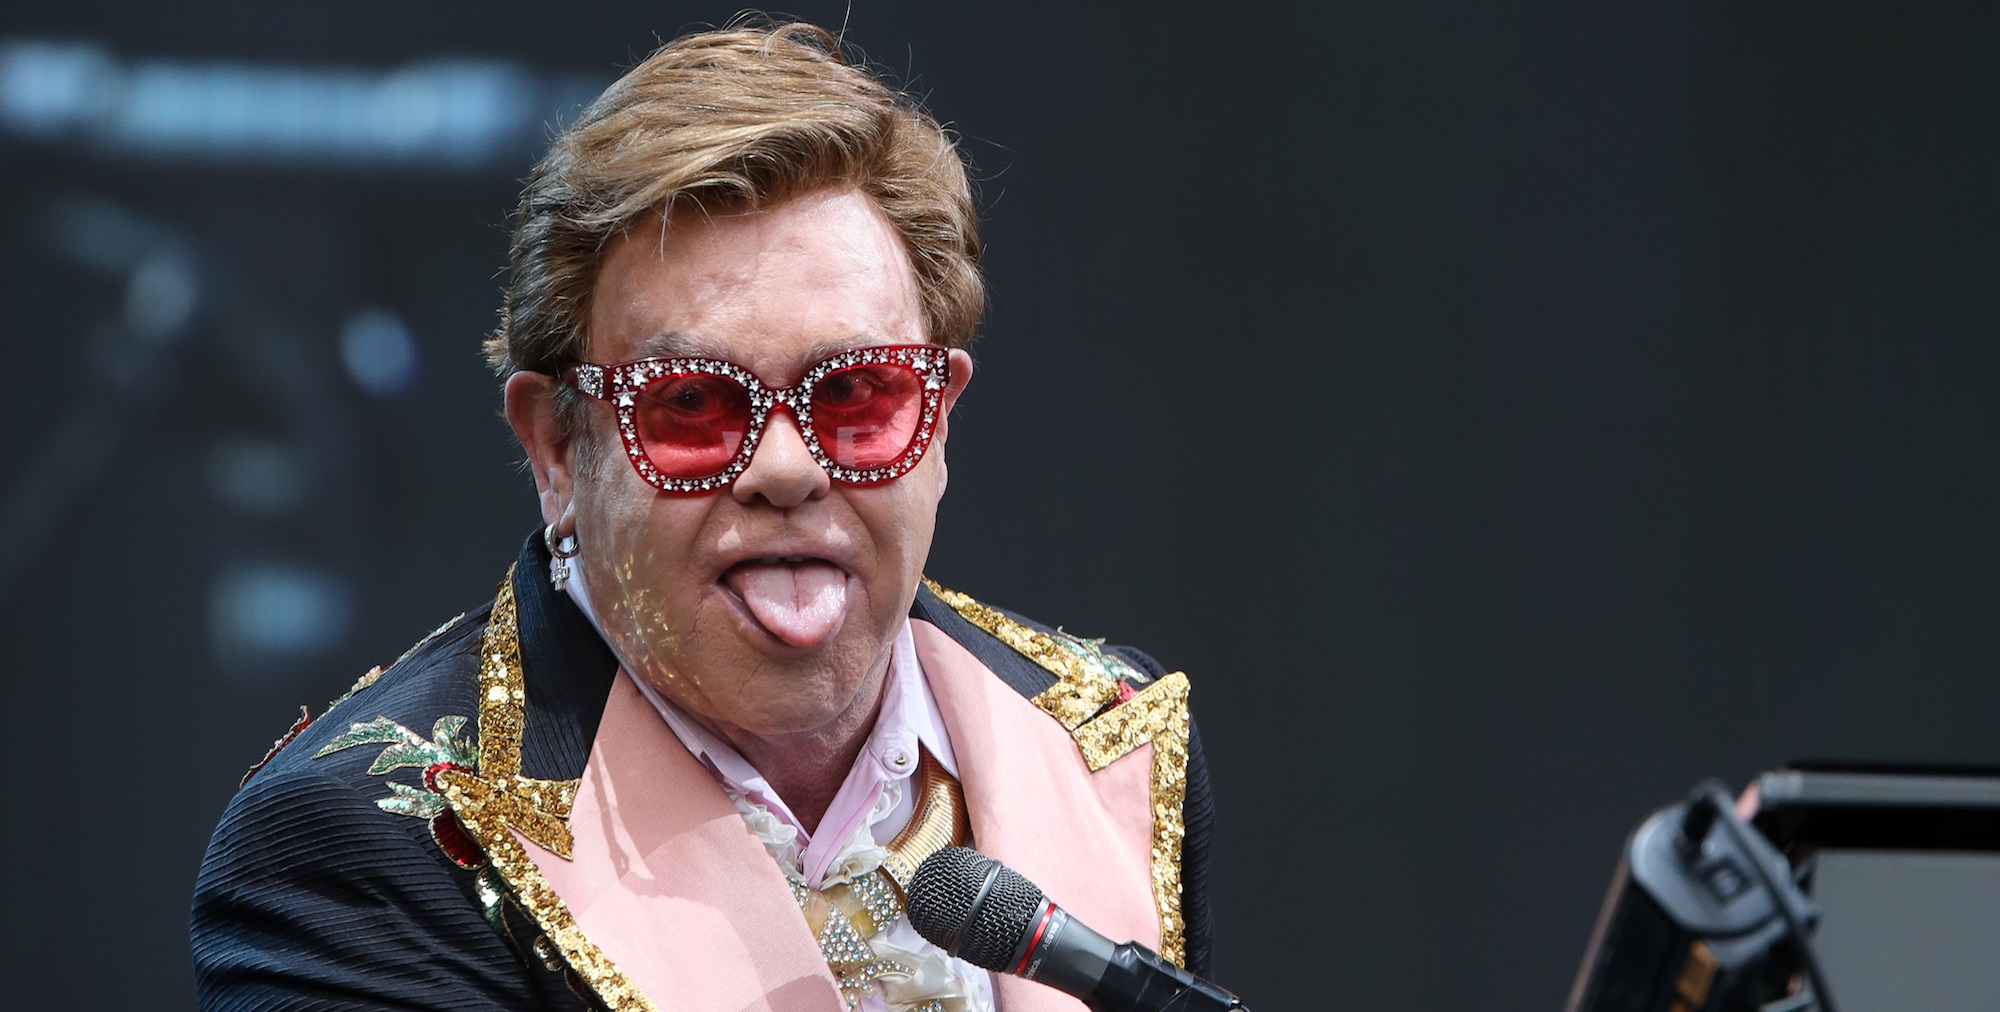 Elton John: “Most Of The Records In The Charts Today Are Not Real Songs”